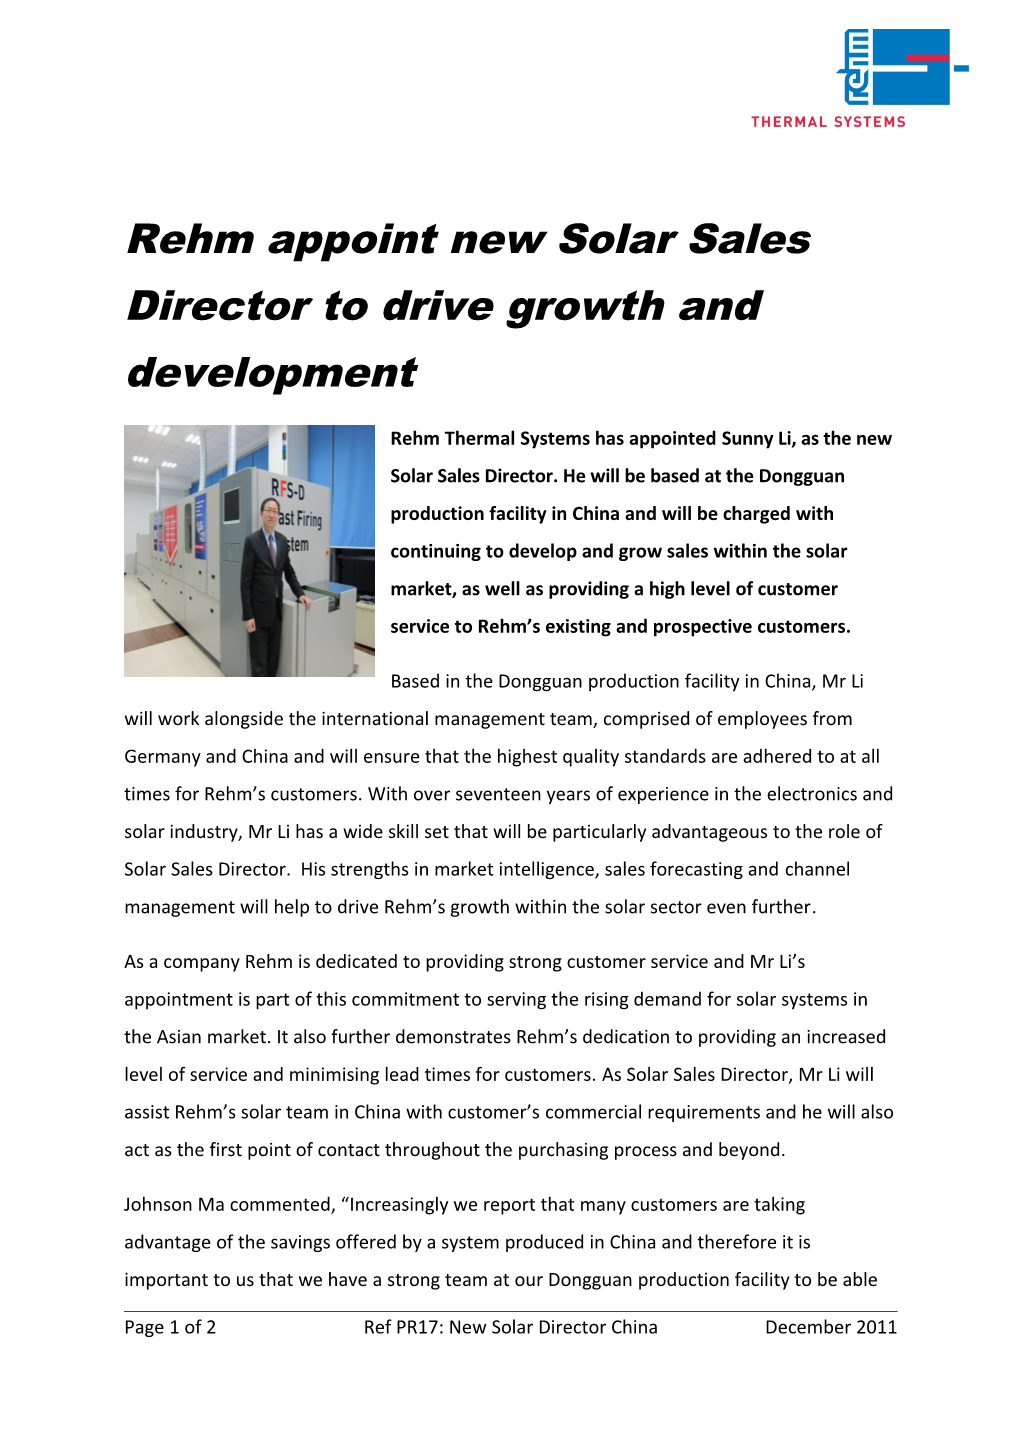 Rehm Appoint New Solar Sales Director to Drive Growth and Development